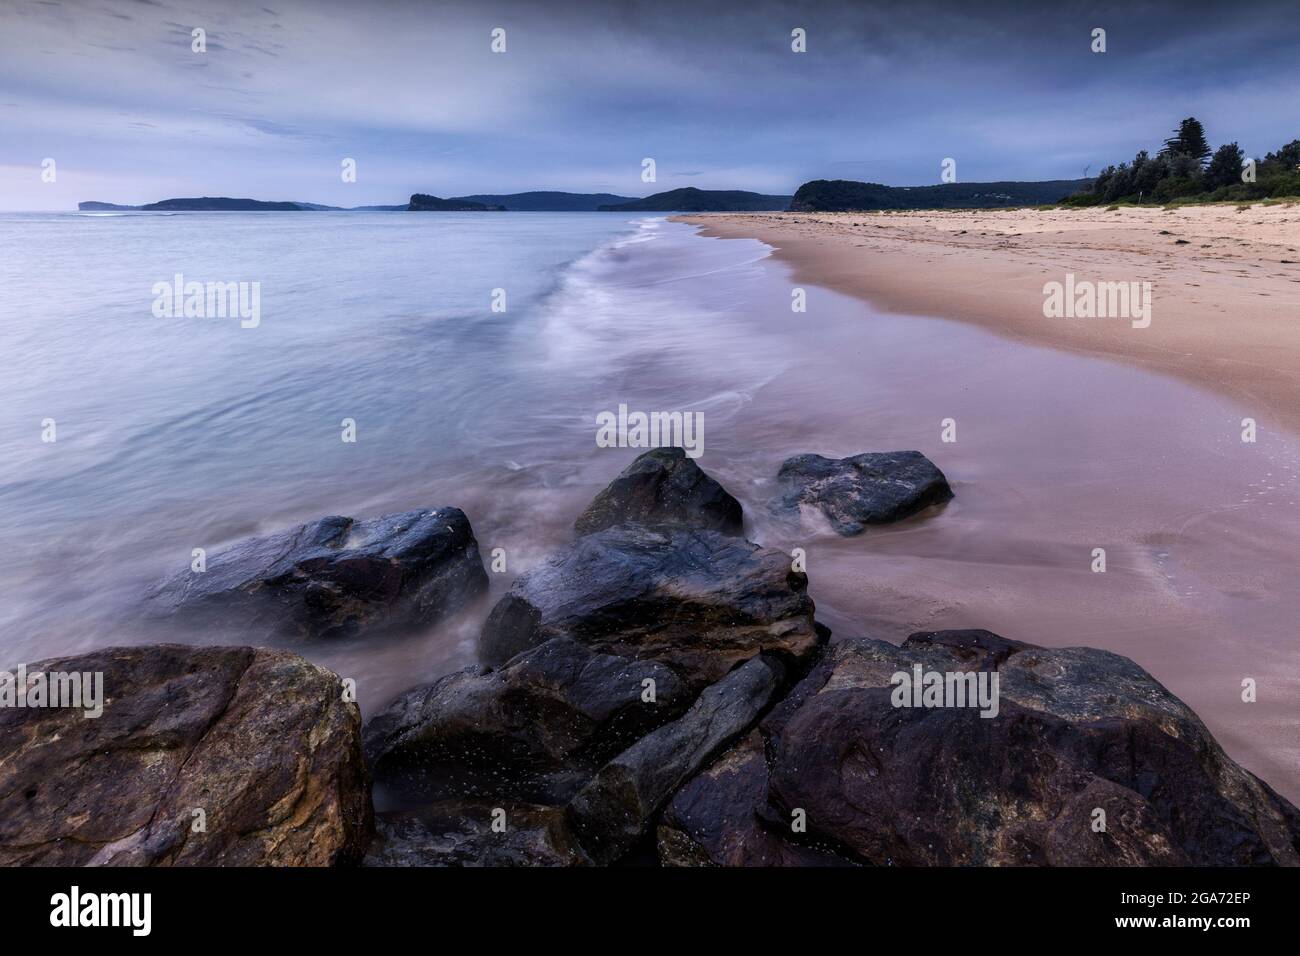 Hues on the water at ettalong beach on nsw central coast Stock Photo